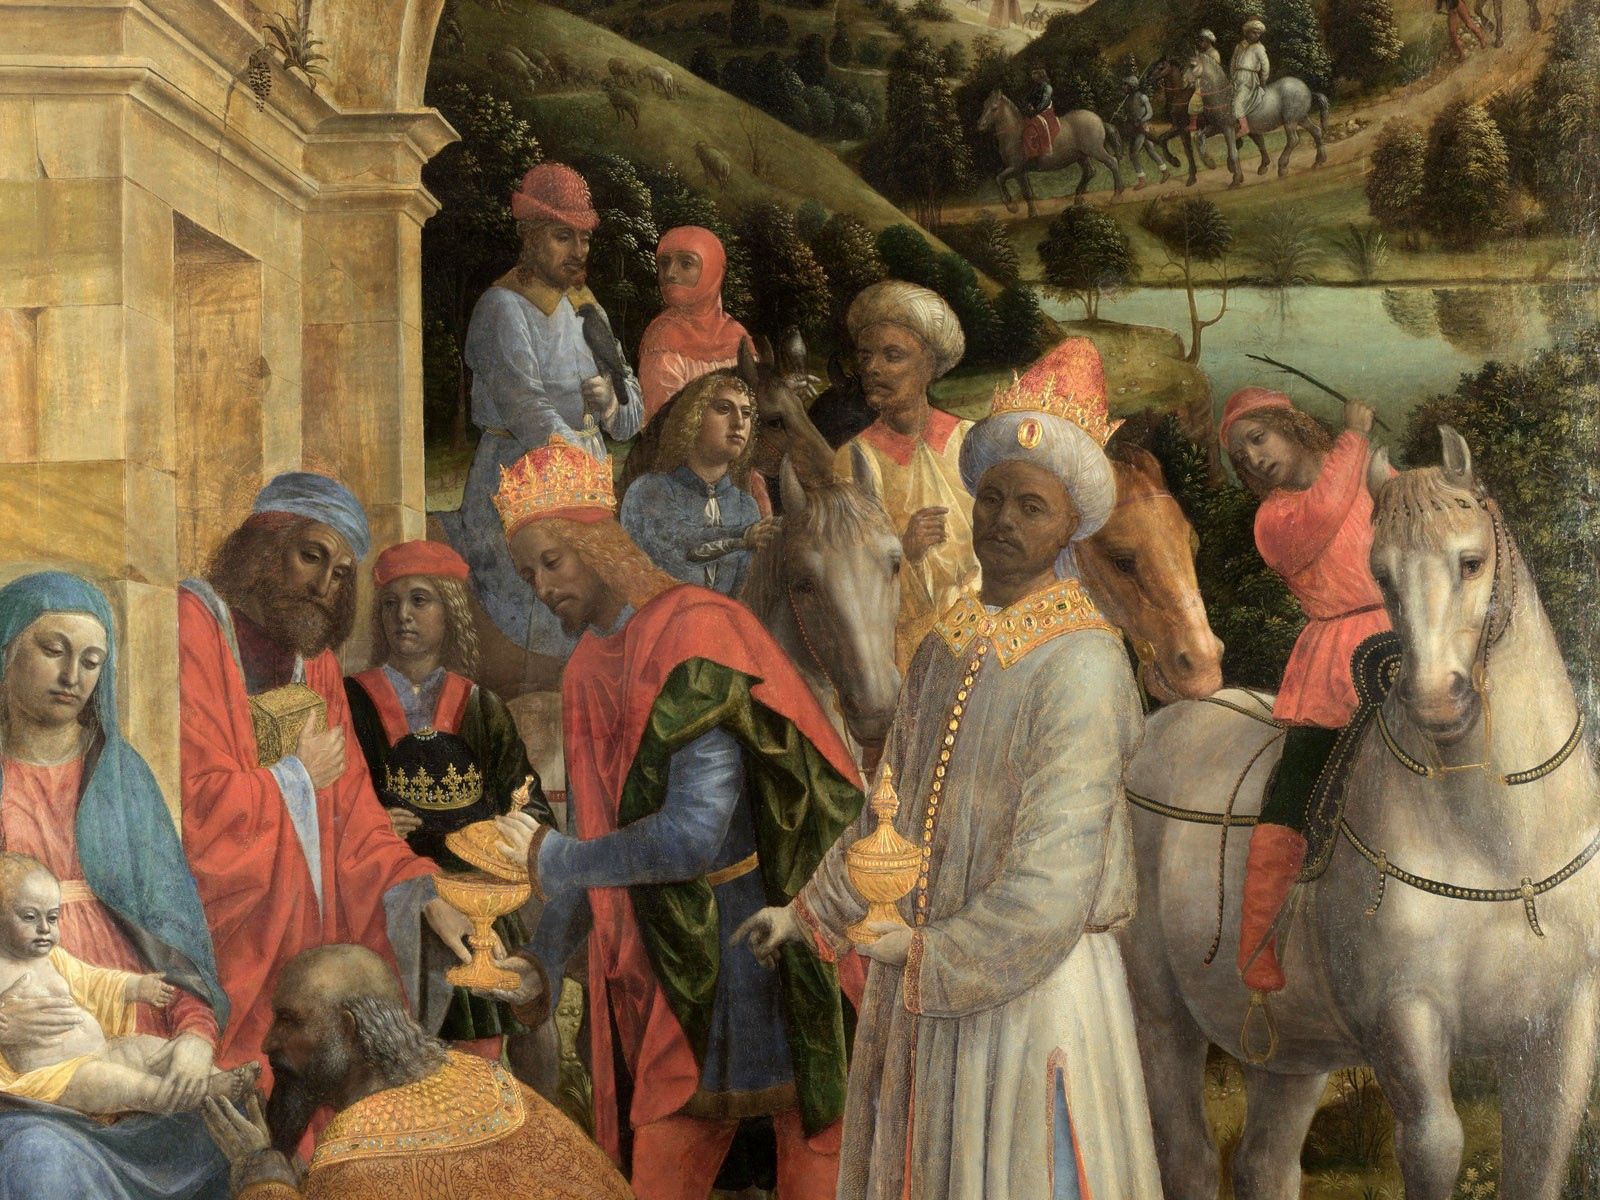 Download wallpaper 1600x1200 vincenzo foppa the adoration of the kings ...